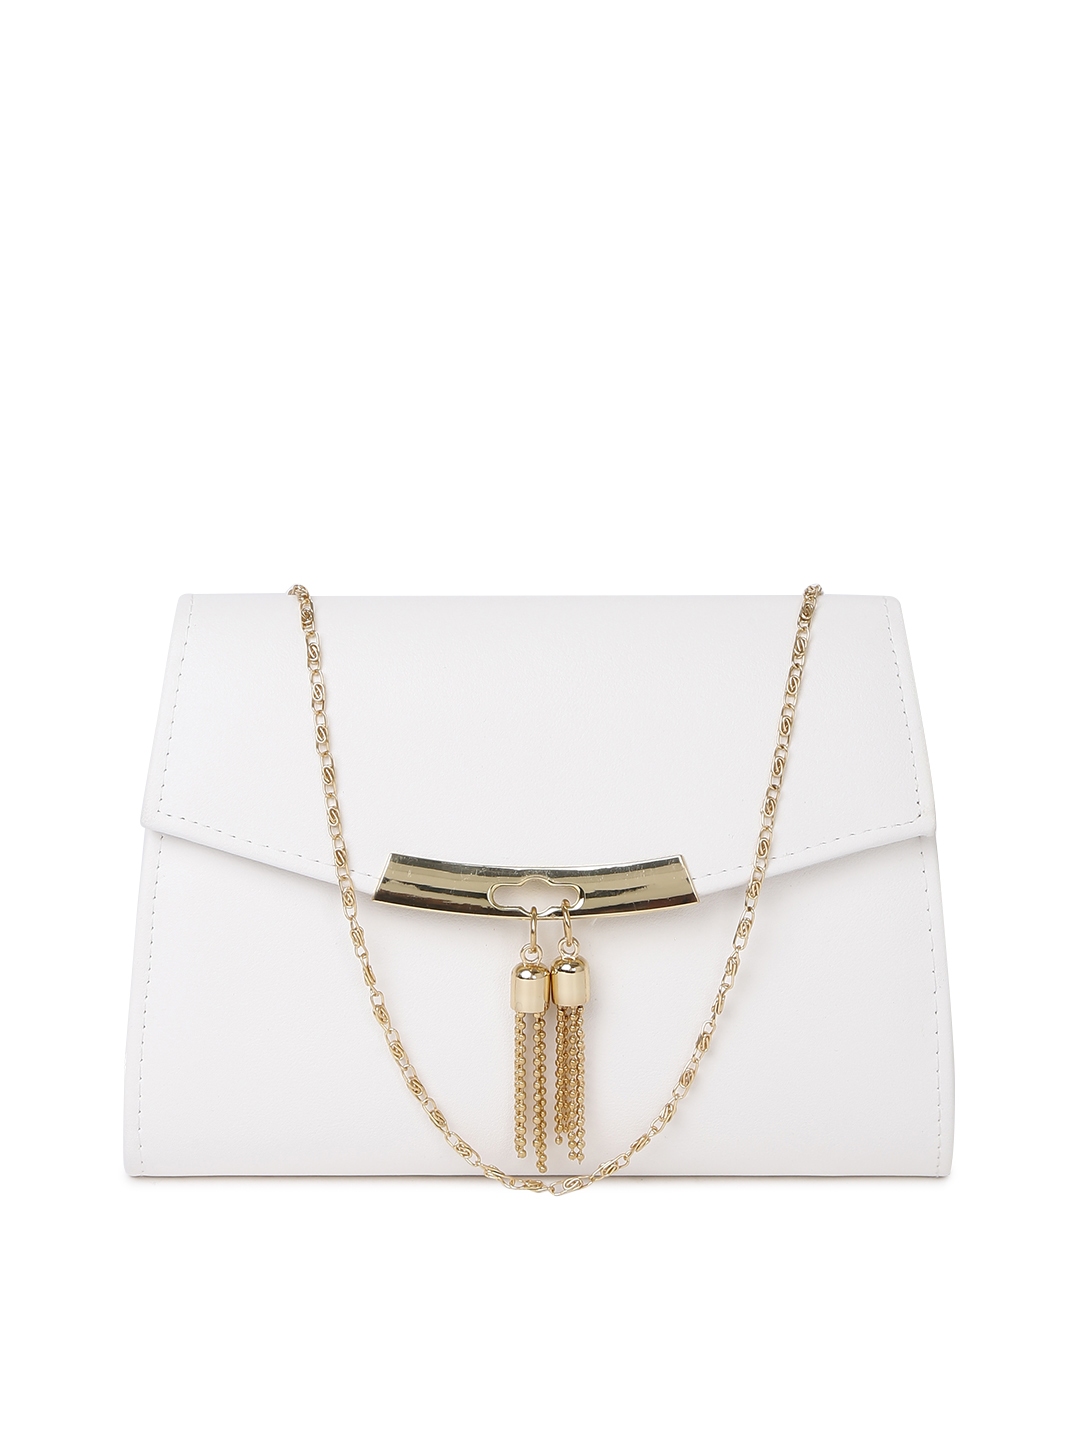 Buy DressBerry Women White Tasselled Clutch With Chain Strap - Clutches ...